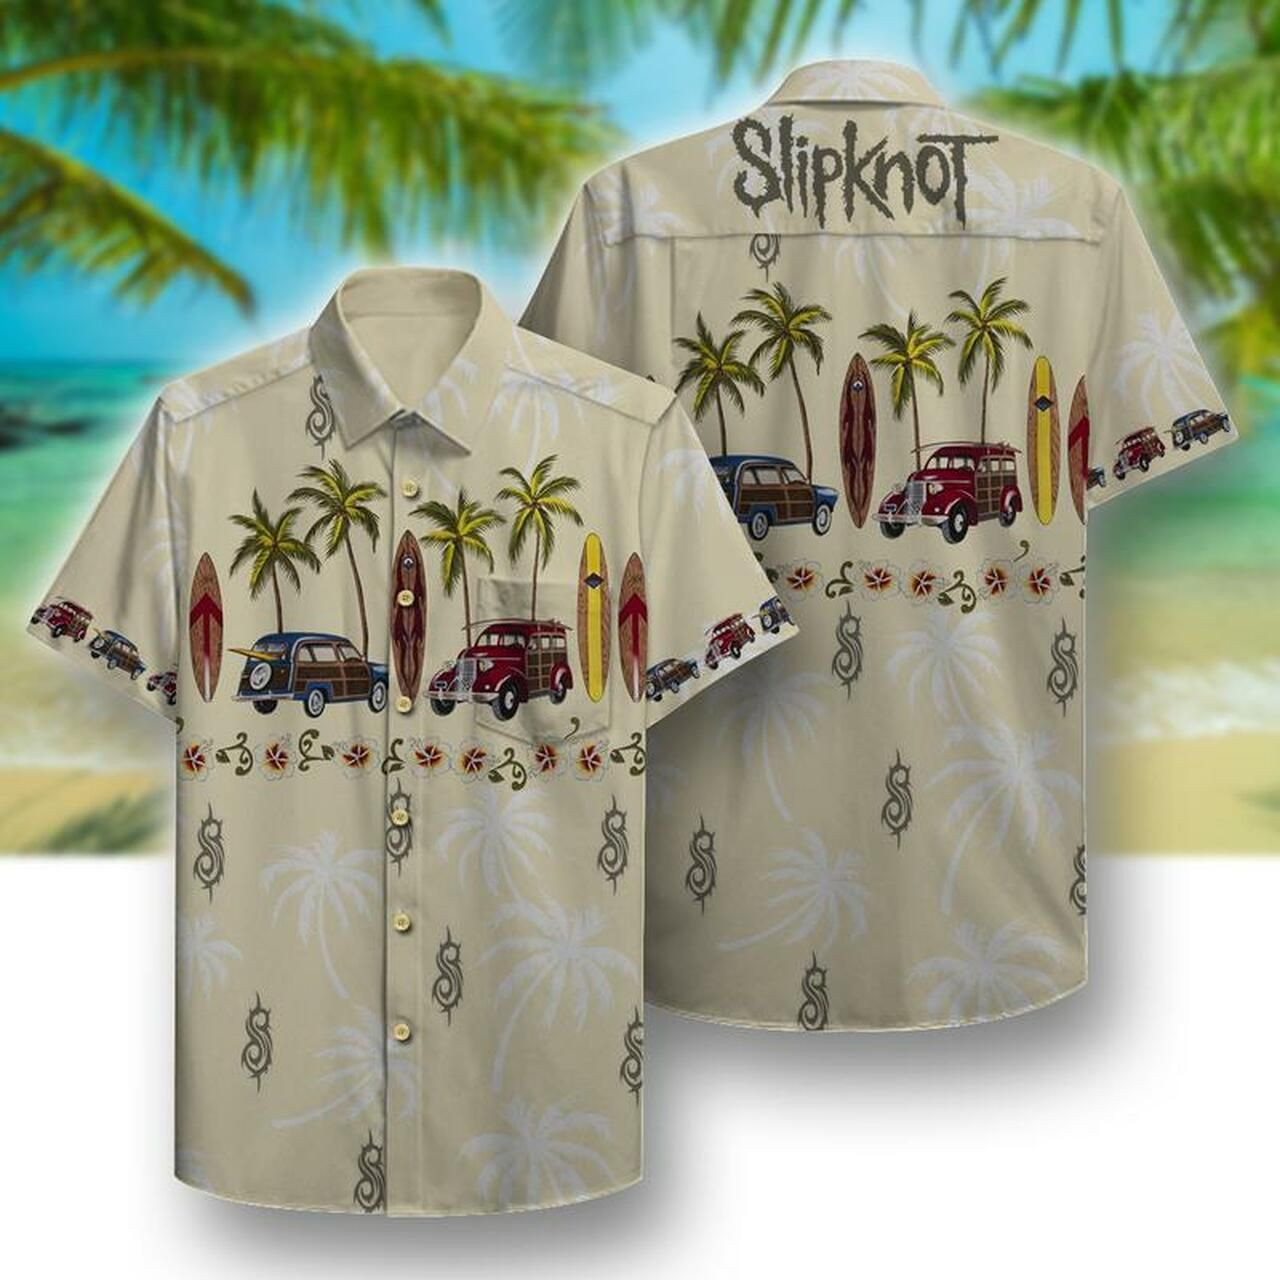 Choose from the many styles and colors to find your favorite Hawaiian Shirt below 140